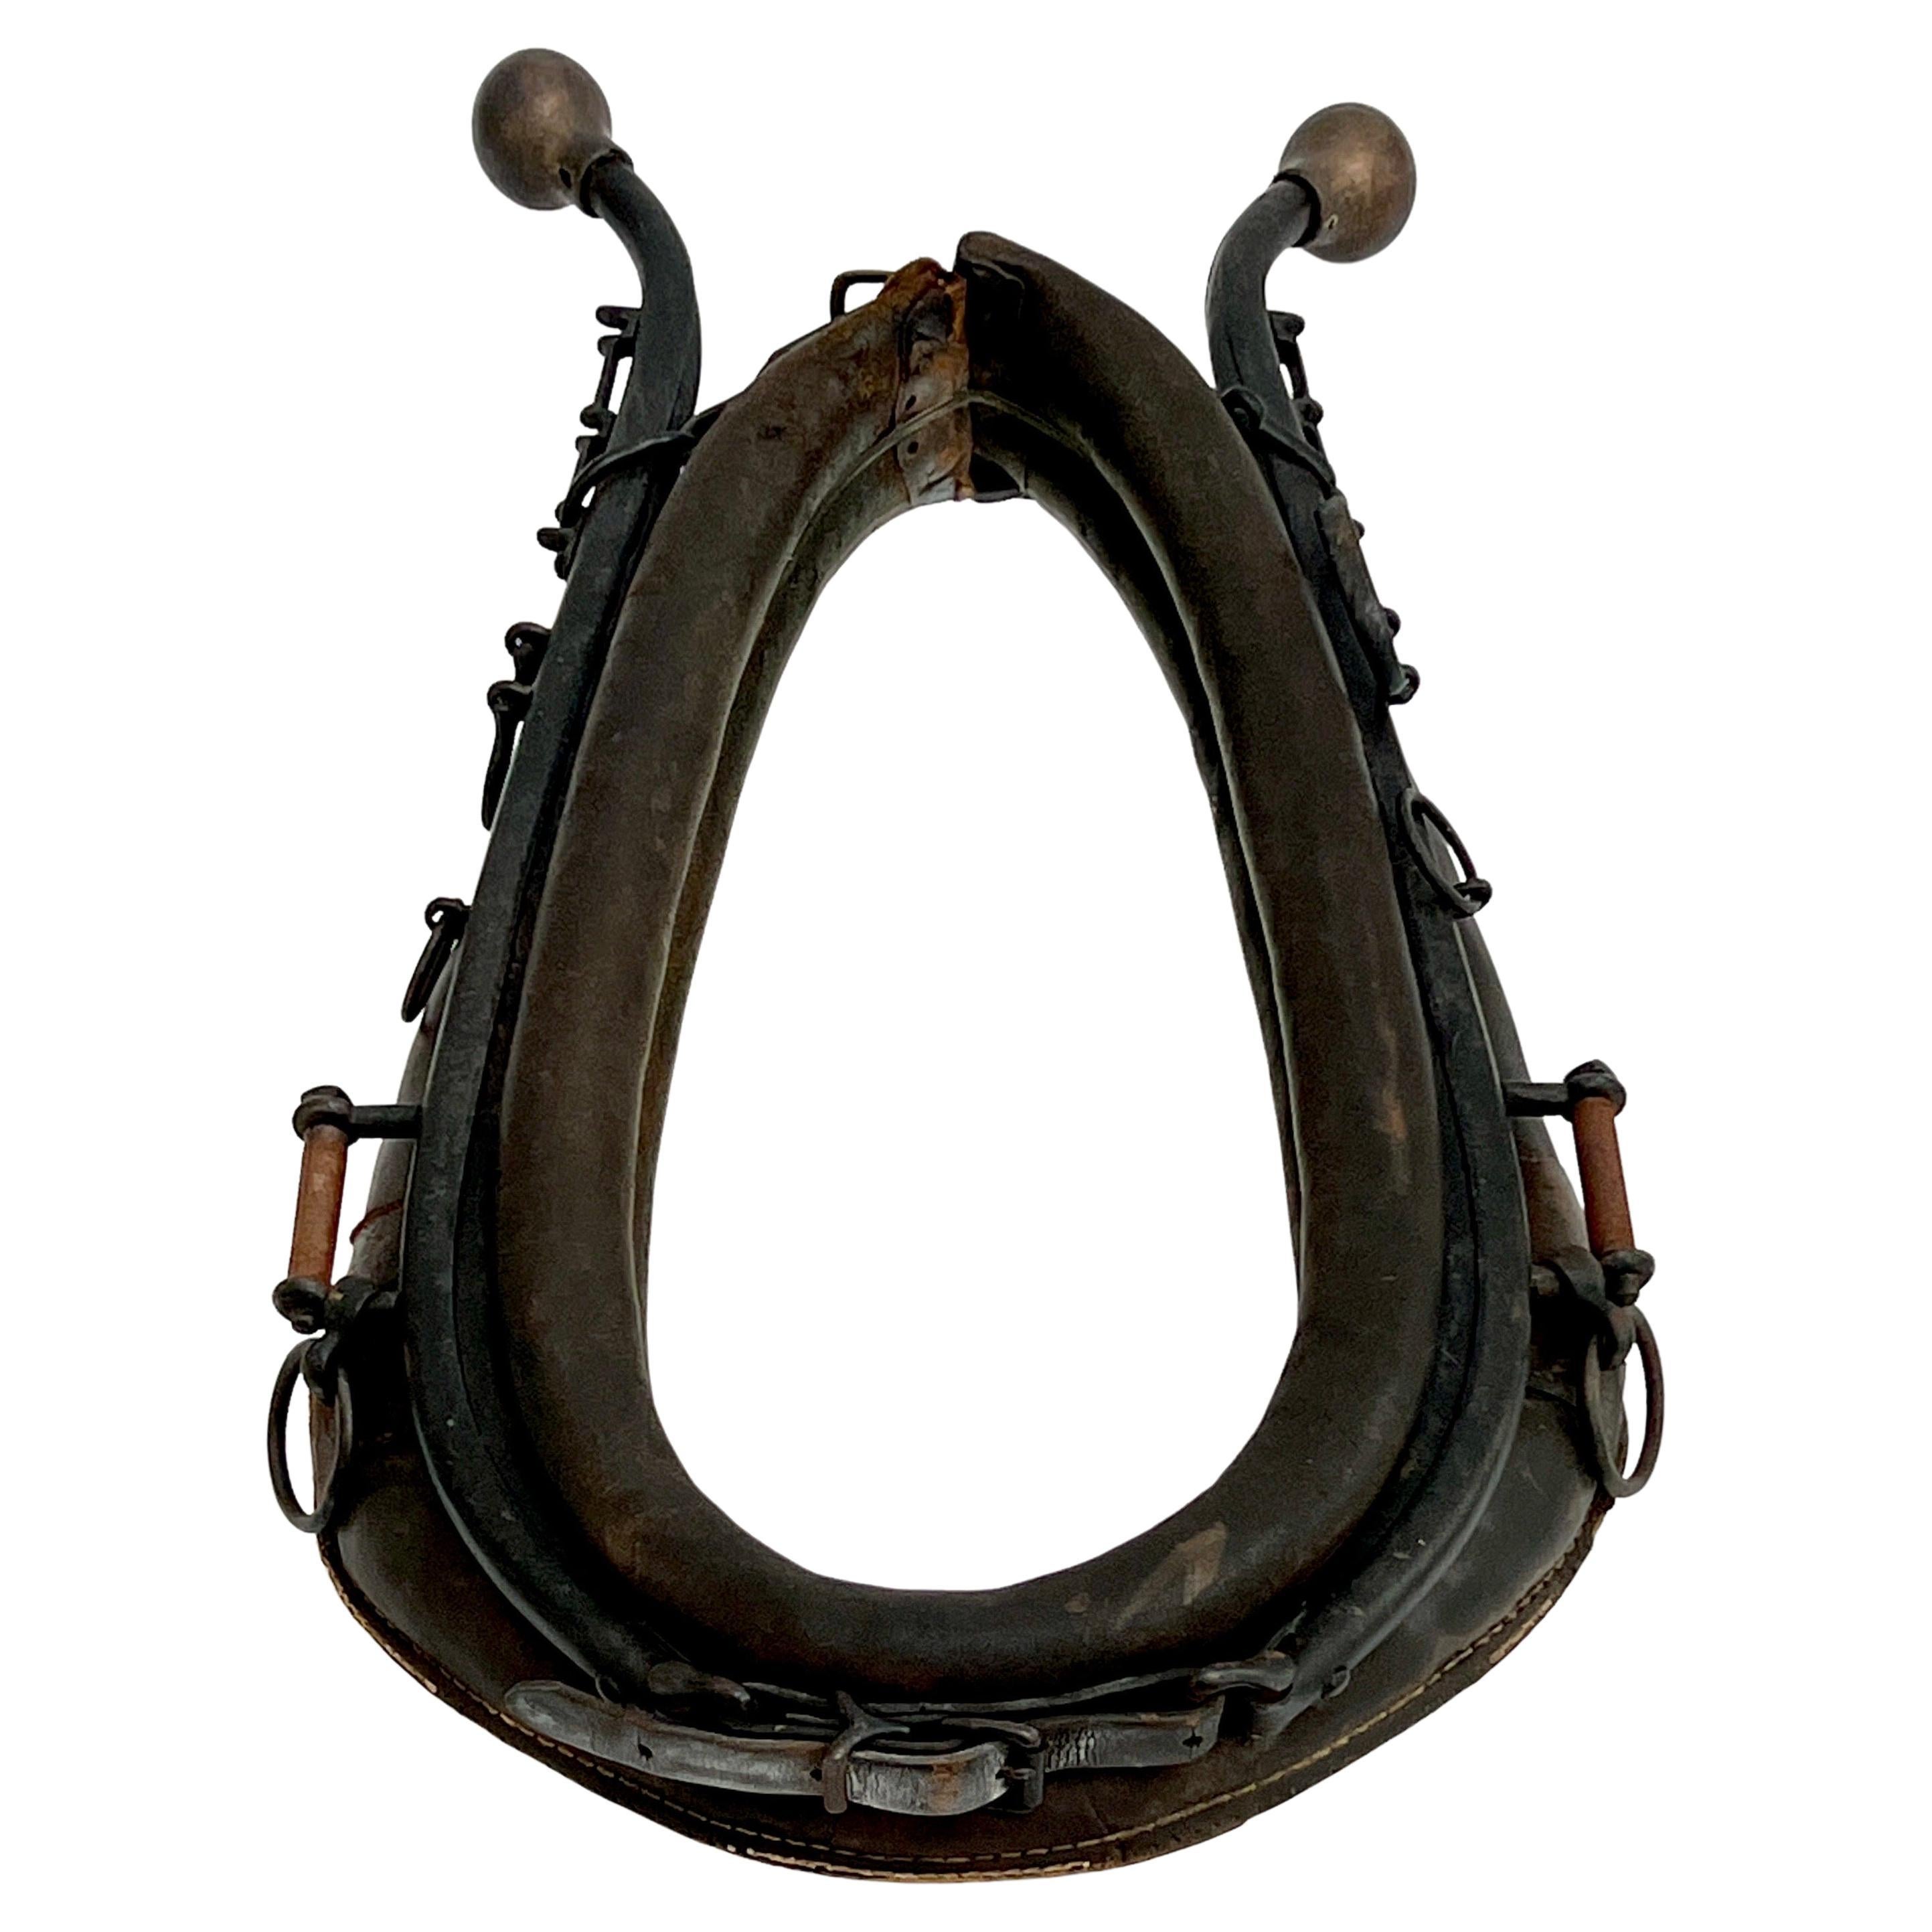 Antique horse collar mirror from the late 19th Century.  Features distressed black leather collar with iron hames in black enamel fitted with patinated brass ball finials, and iron rings along the sides.  Originally used as a horse harness.  